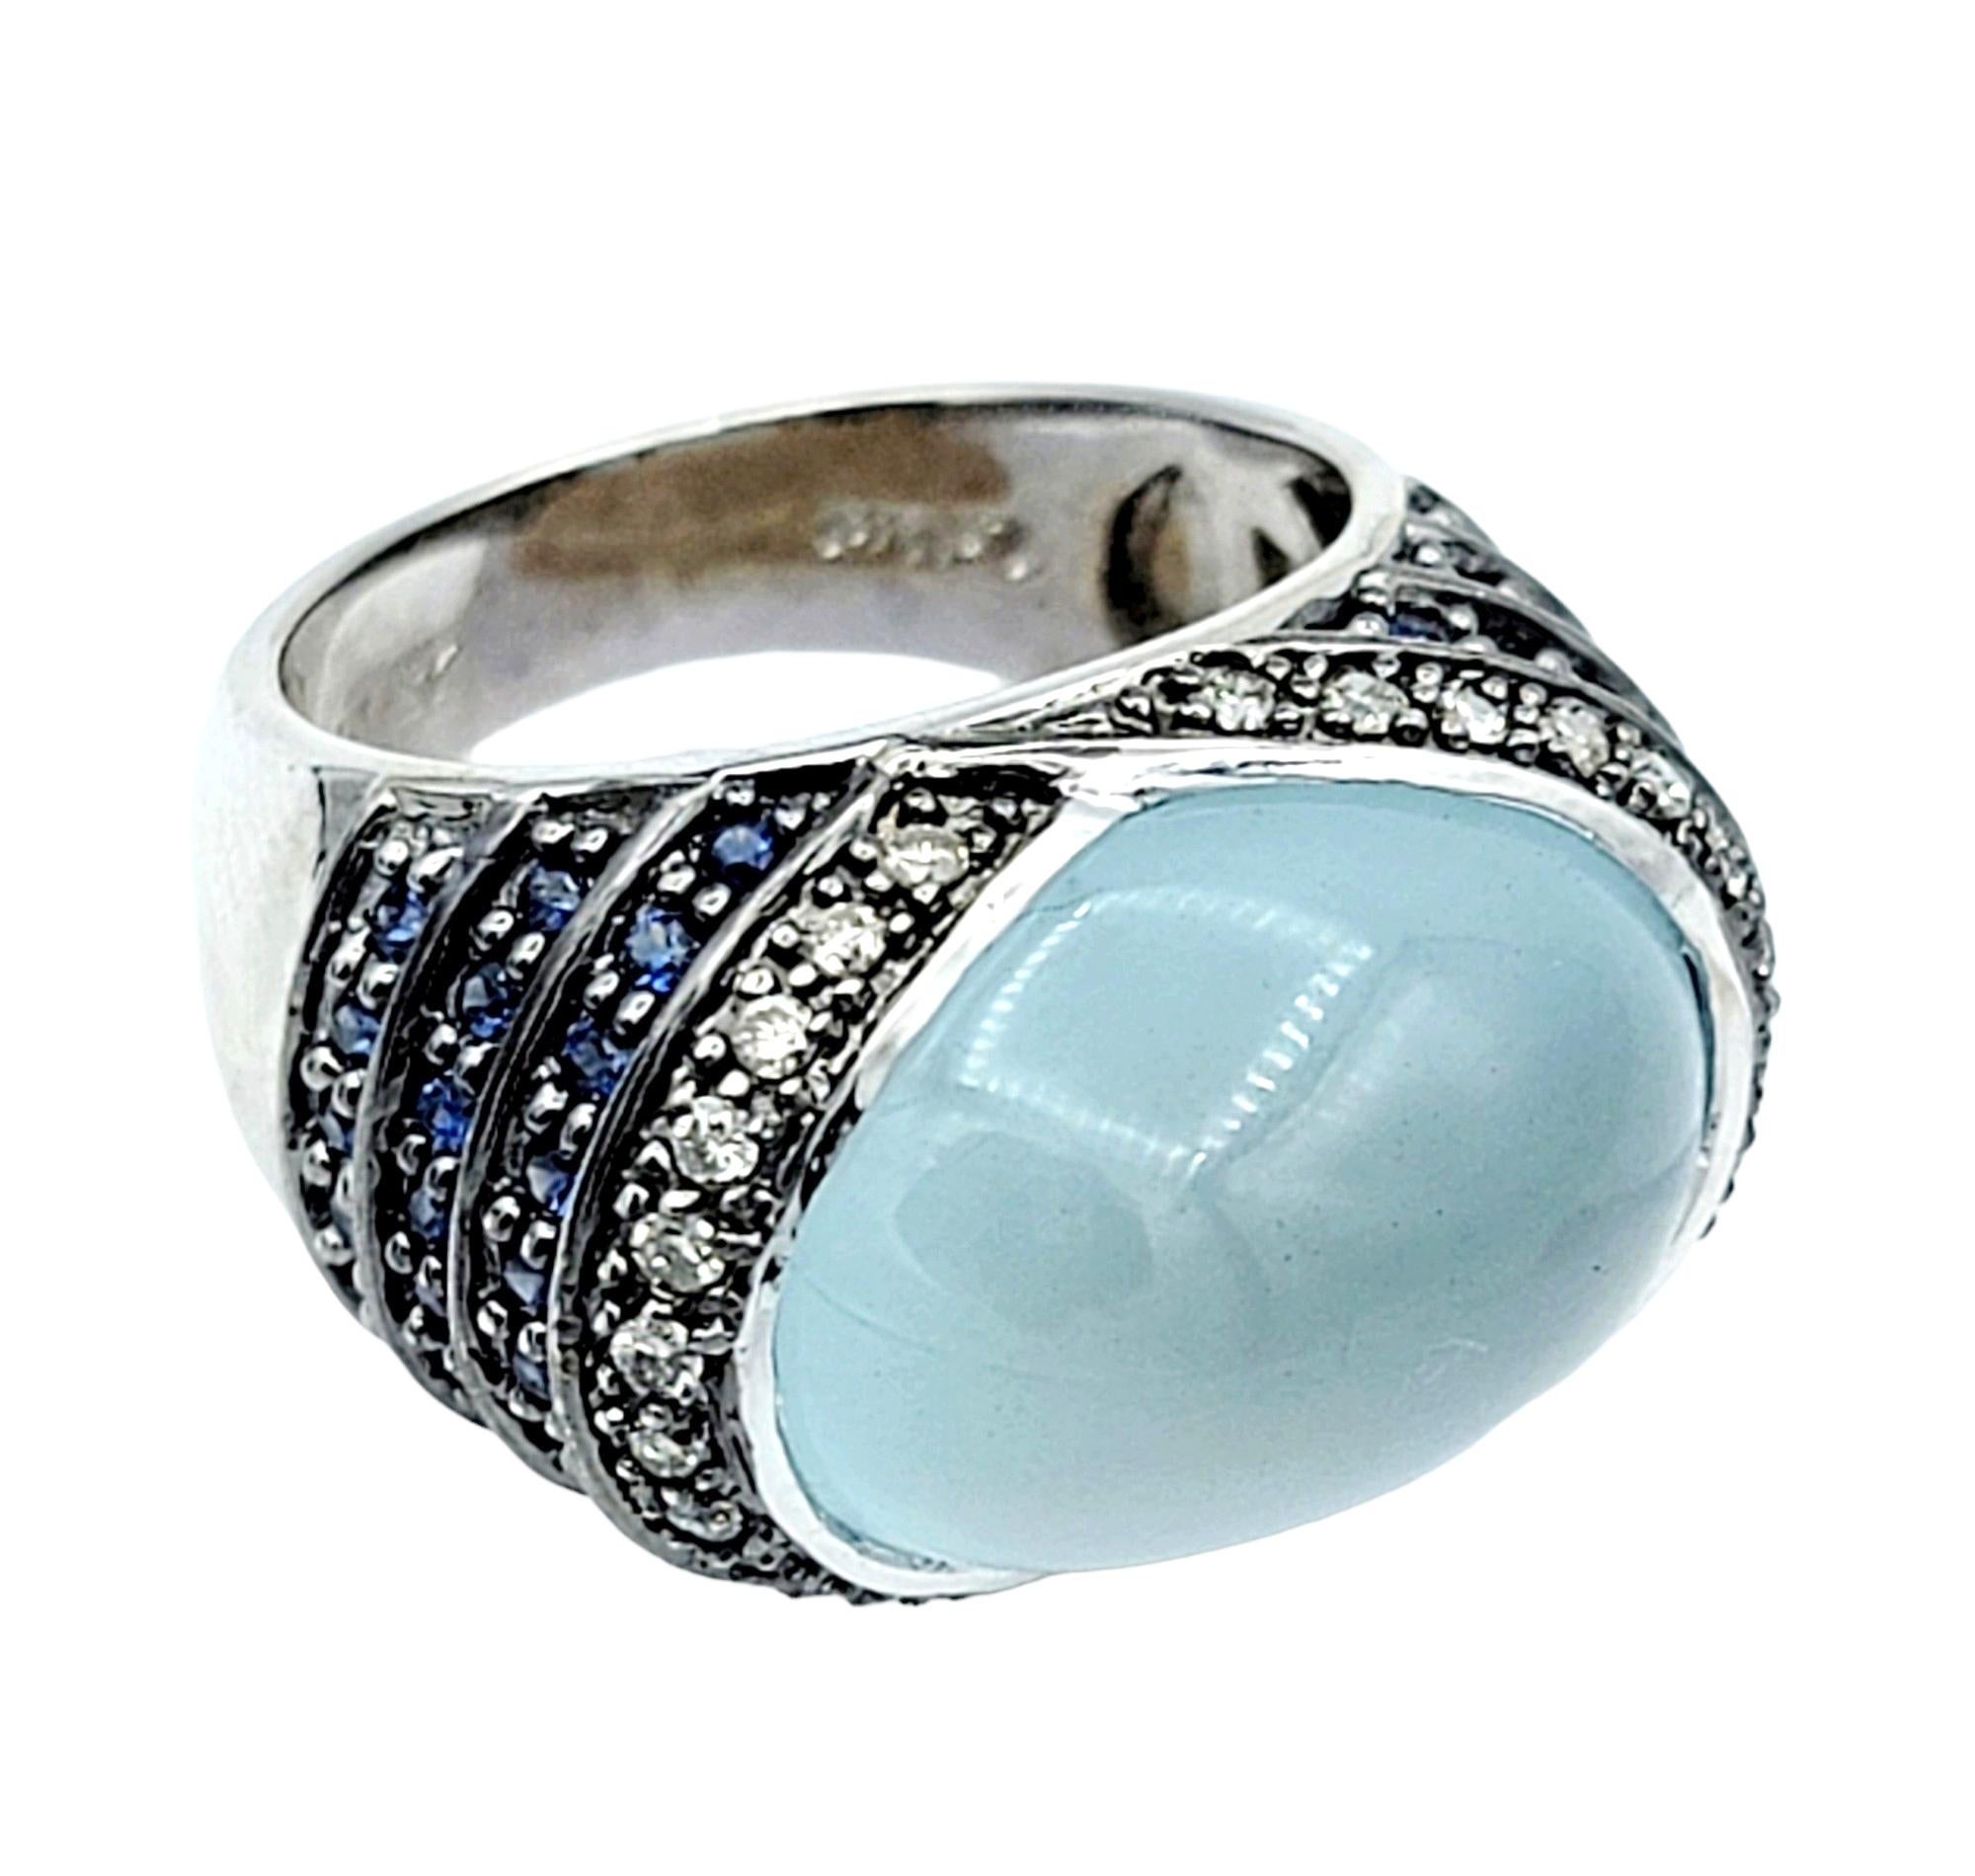 Ring Size: 5 

Elevate your style with this exquisite 14 karat white gold cocktail ring by Le Vian. A mesmerizing oval moonstone cabochon takes center stage, showcasing its ethereal adularescence that shimmers with every movement. The moonstone's